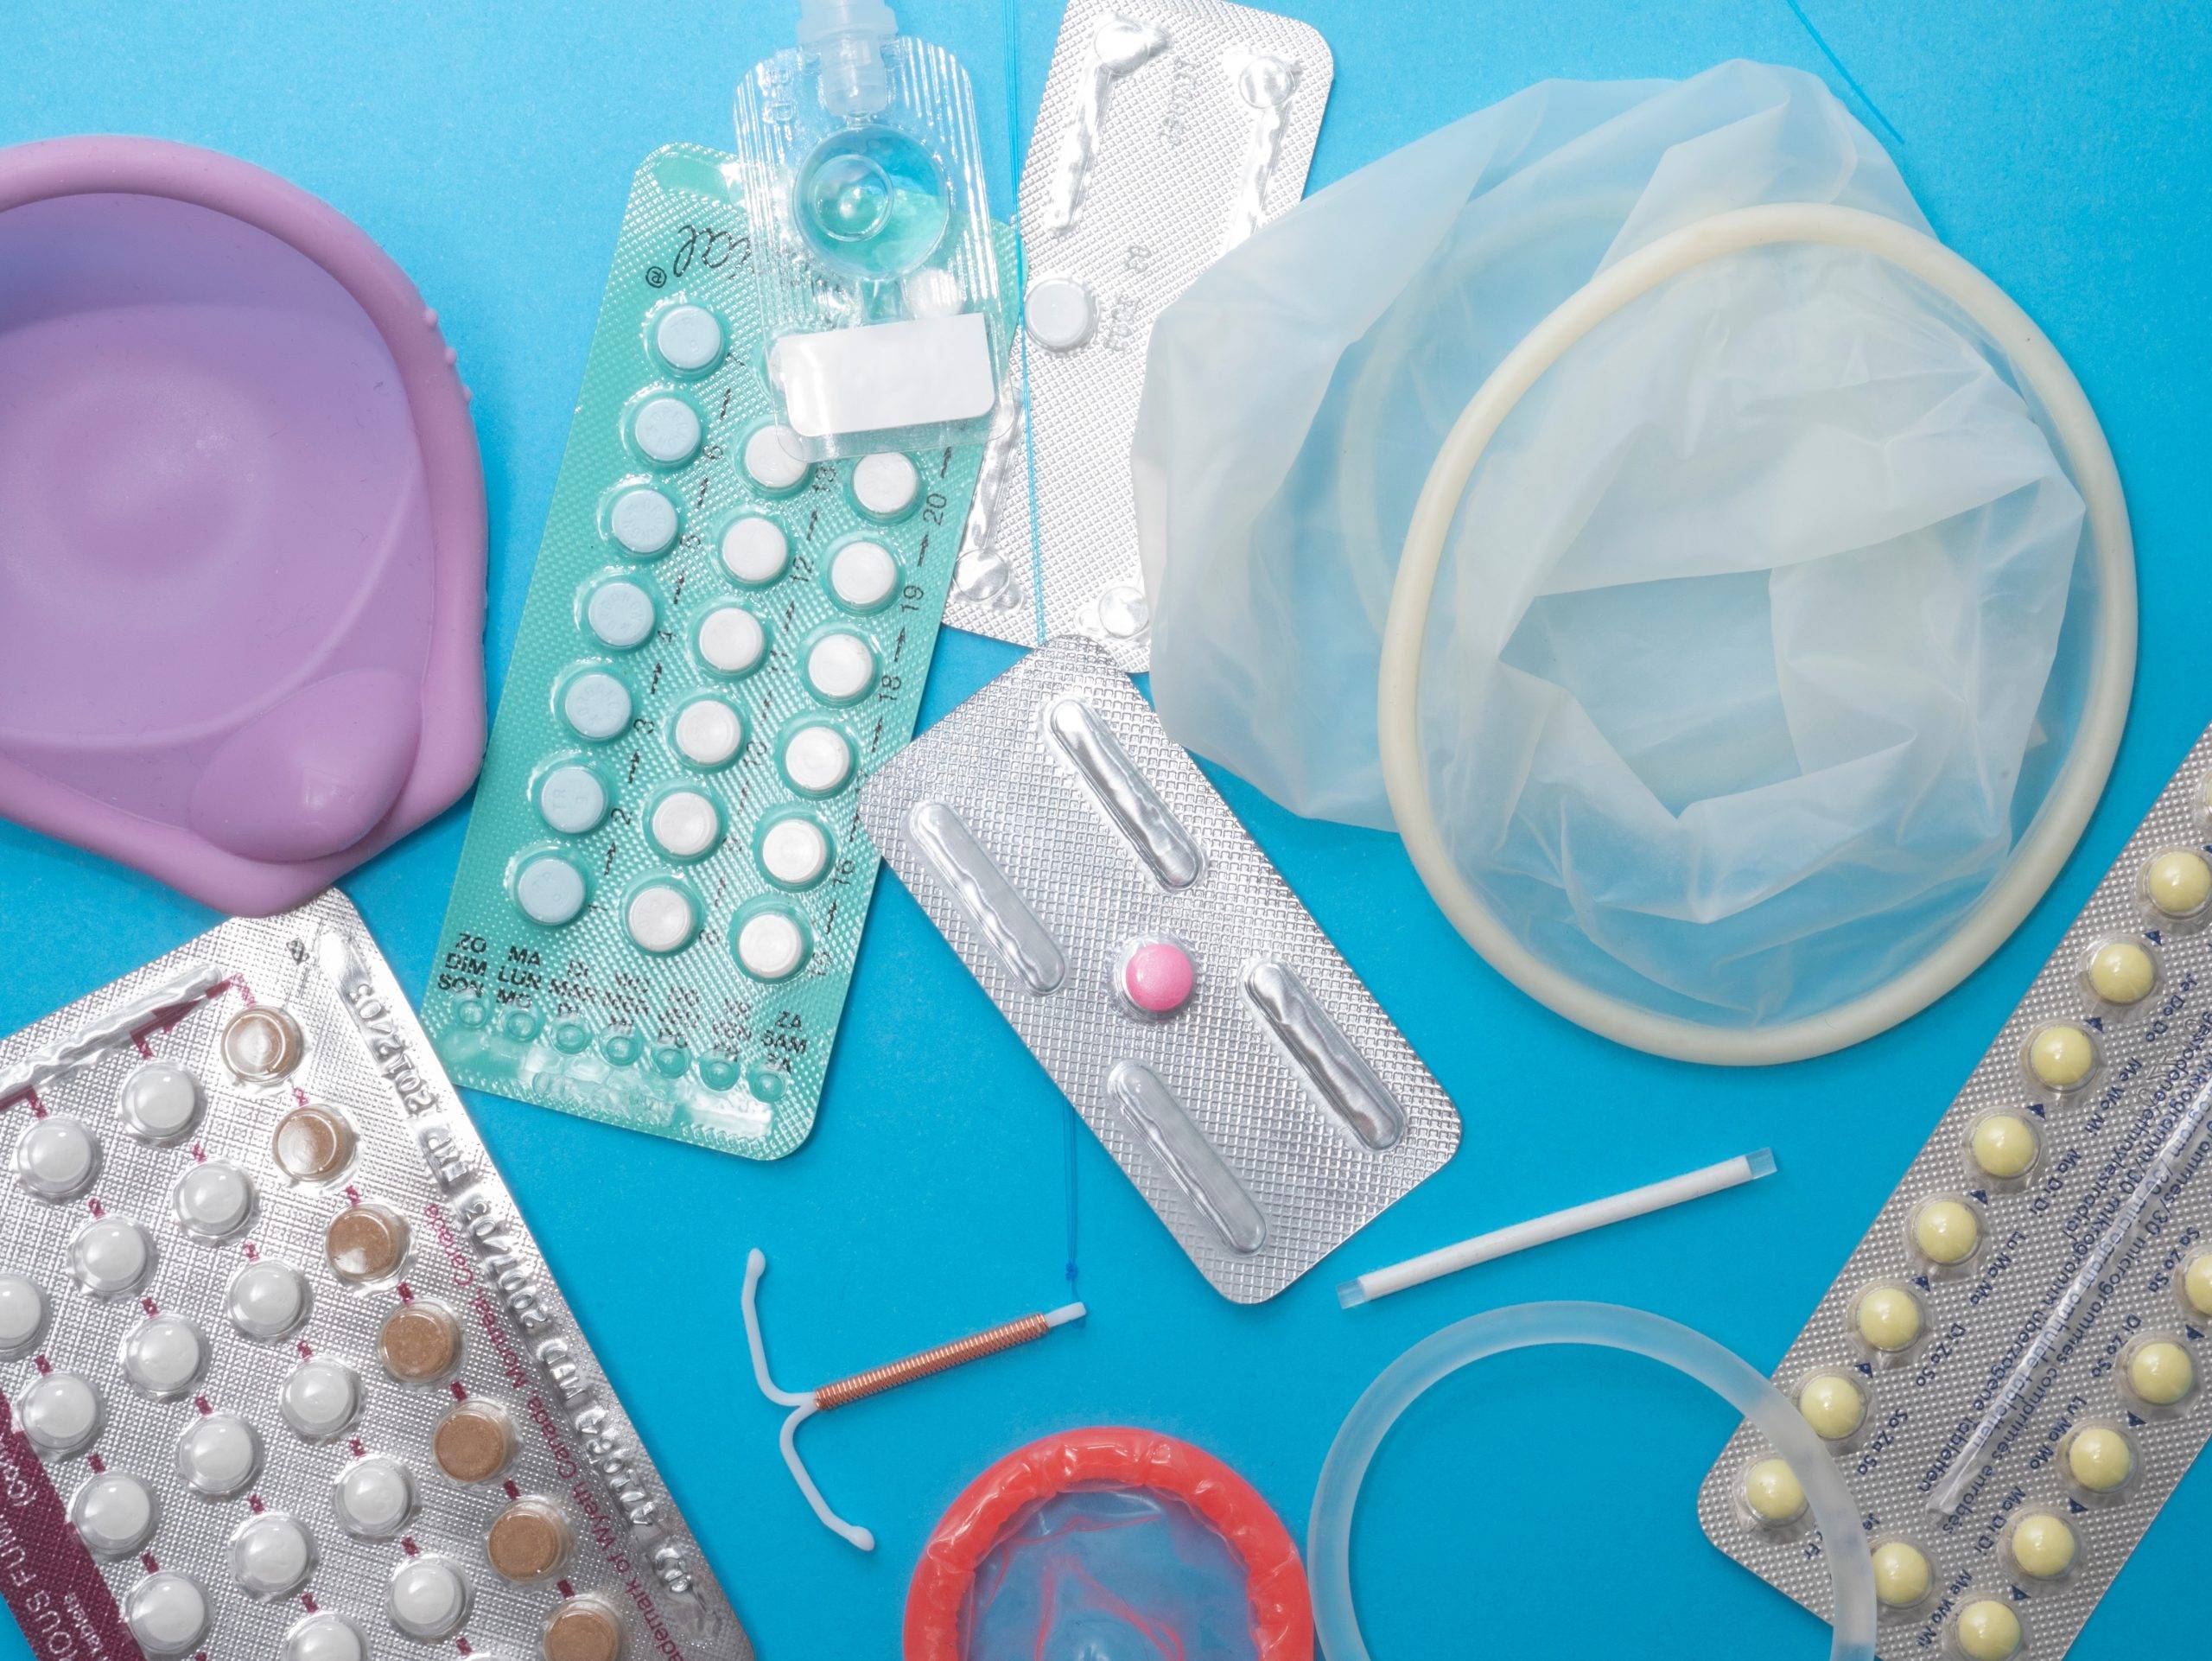 reproductive-health-supplies-birth-control-after-abortion